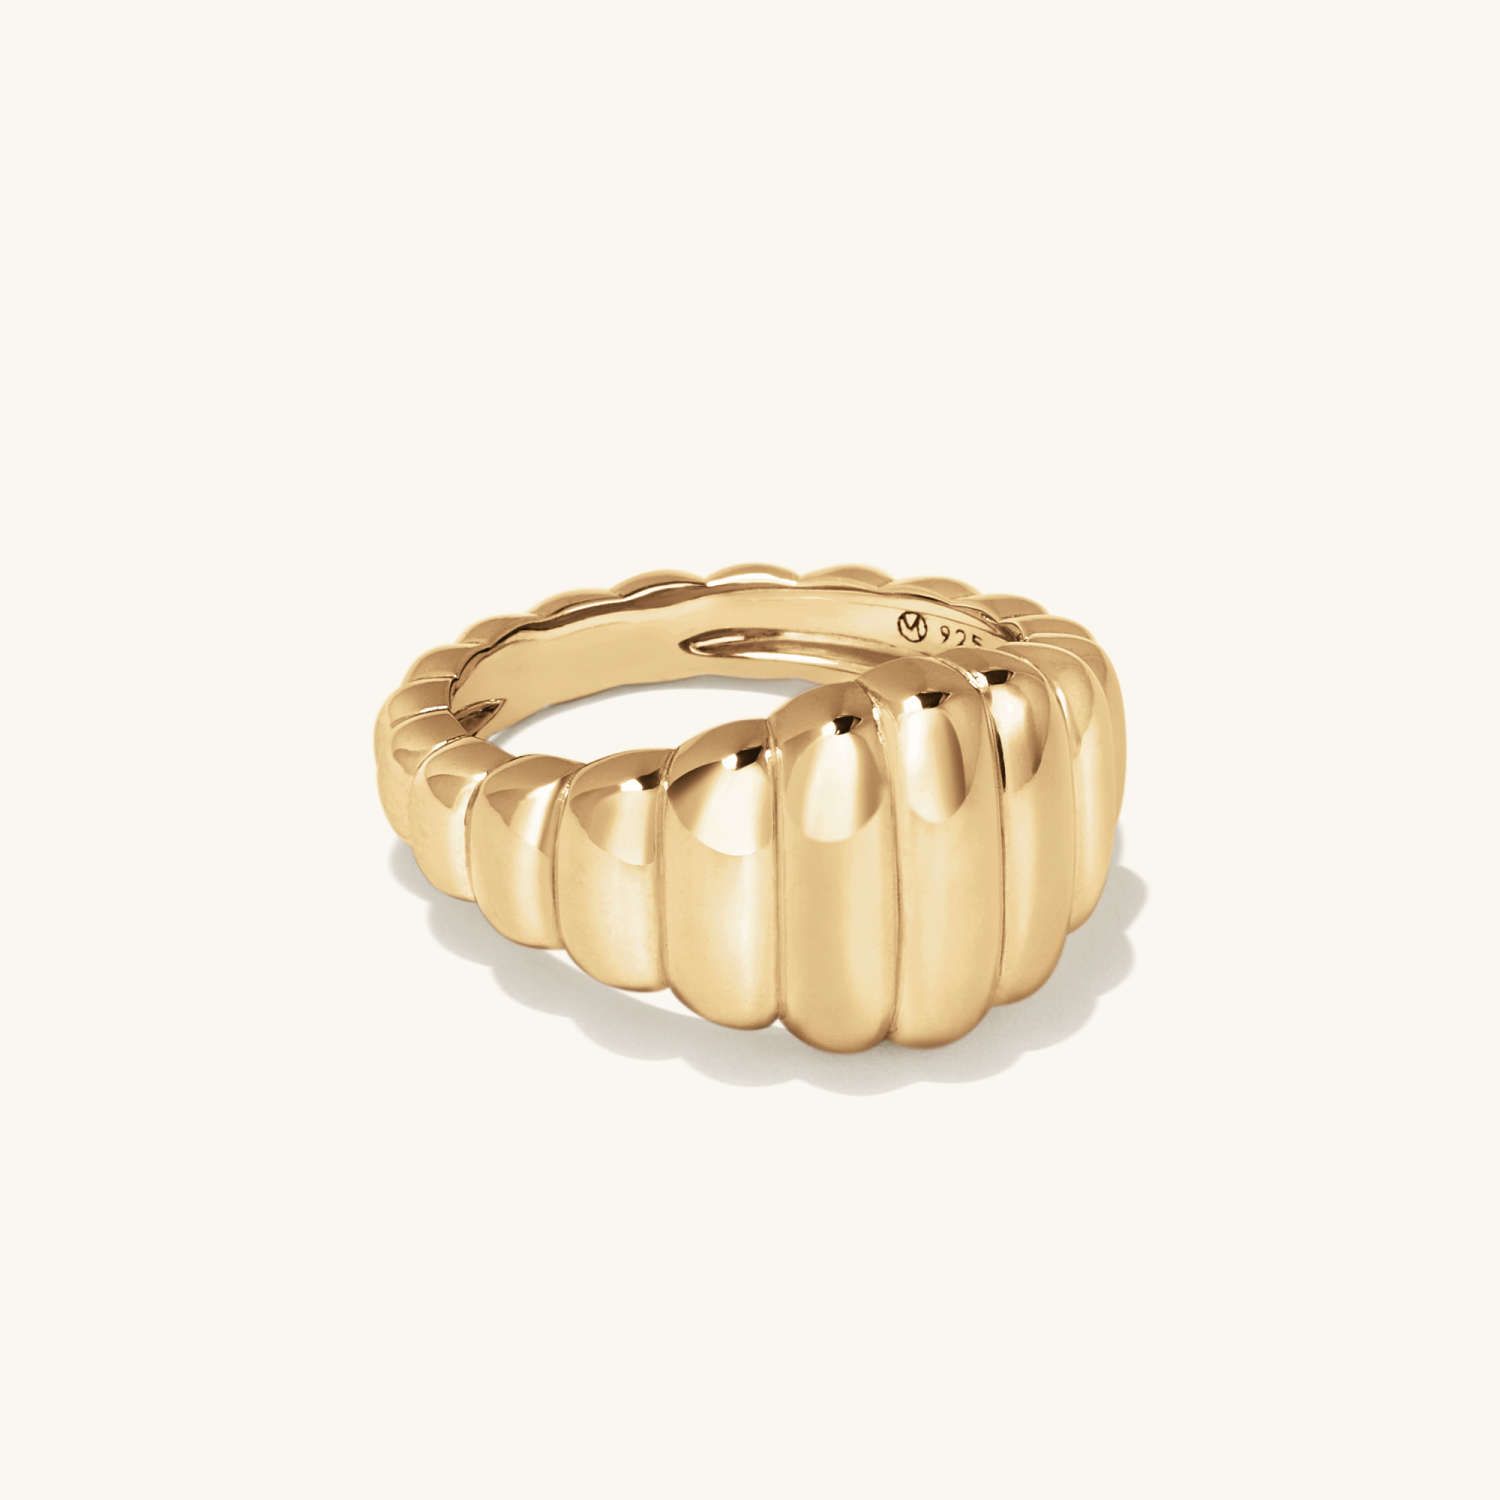 Charlotte Bold Signet Ring: Handcrafted in 18k Gold Vermeil | Mejuri | Mejuri (Global)